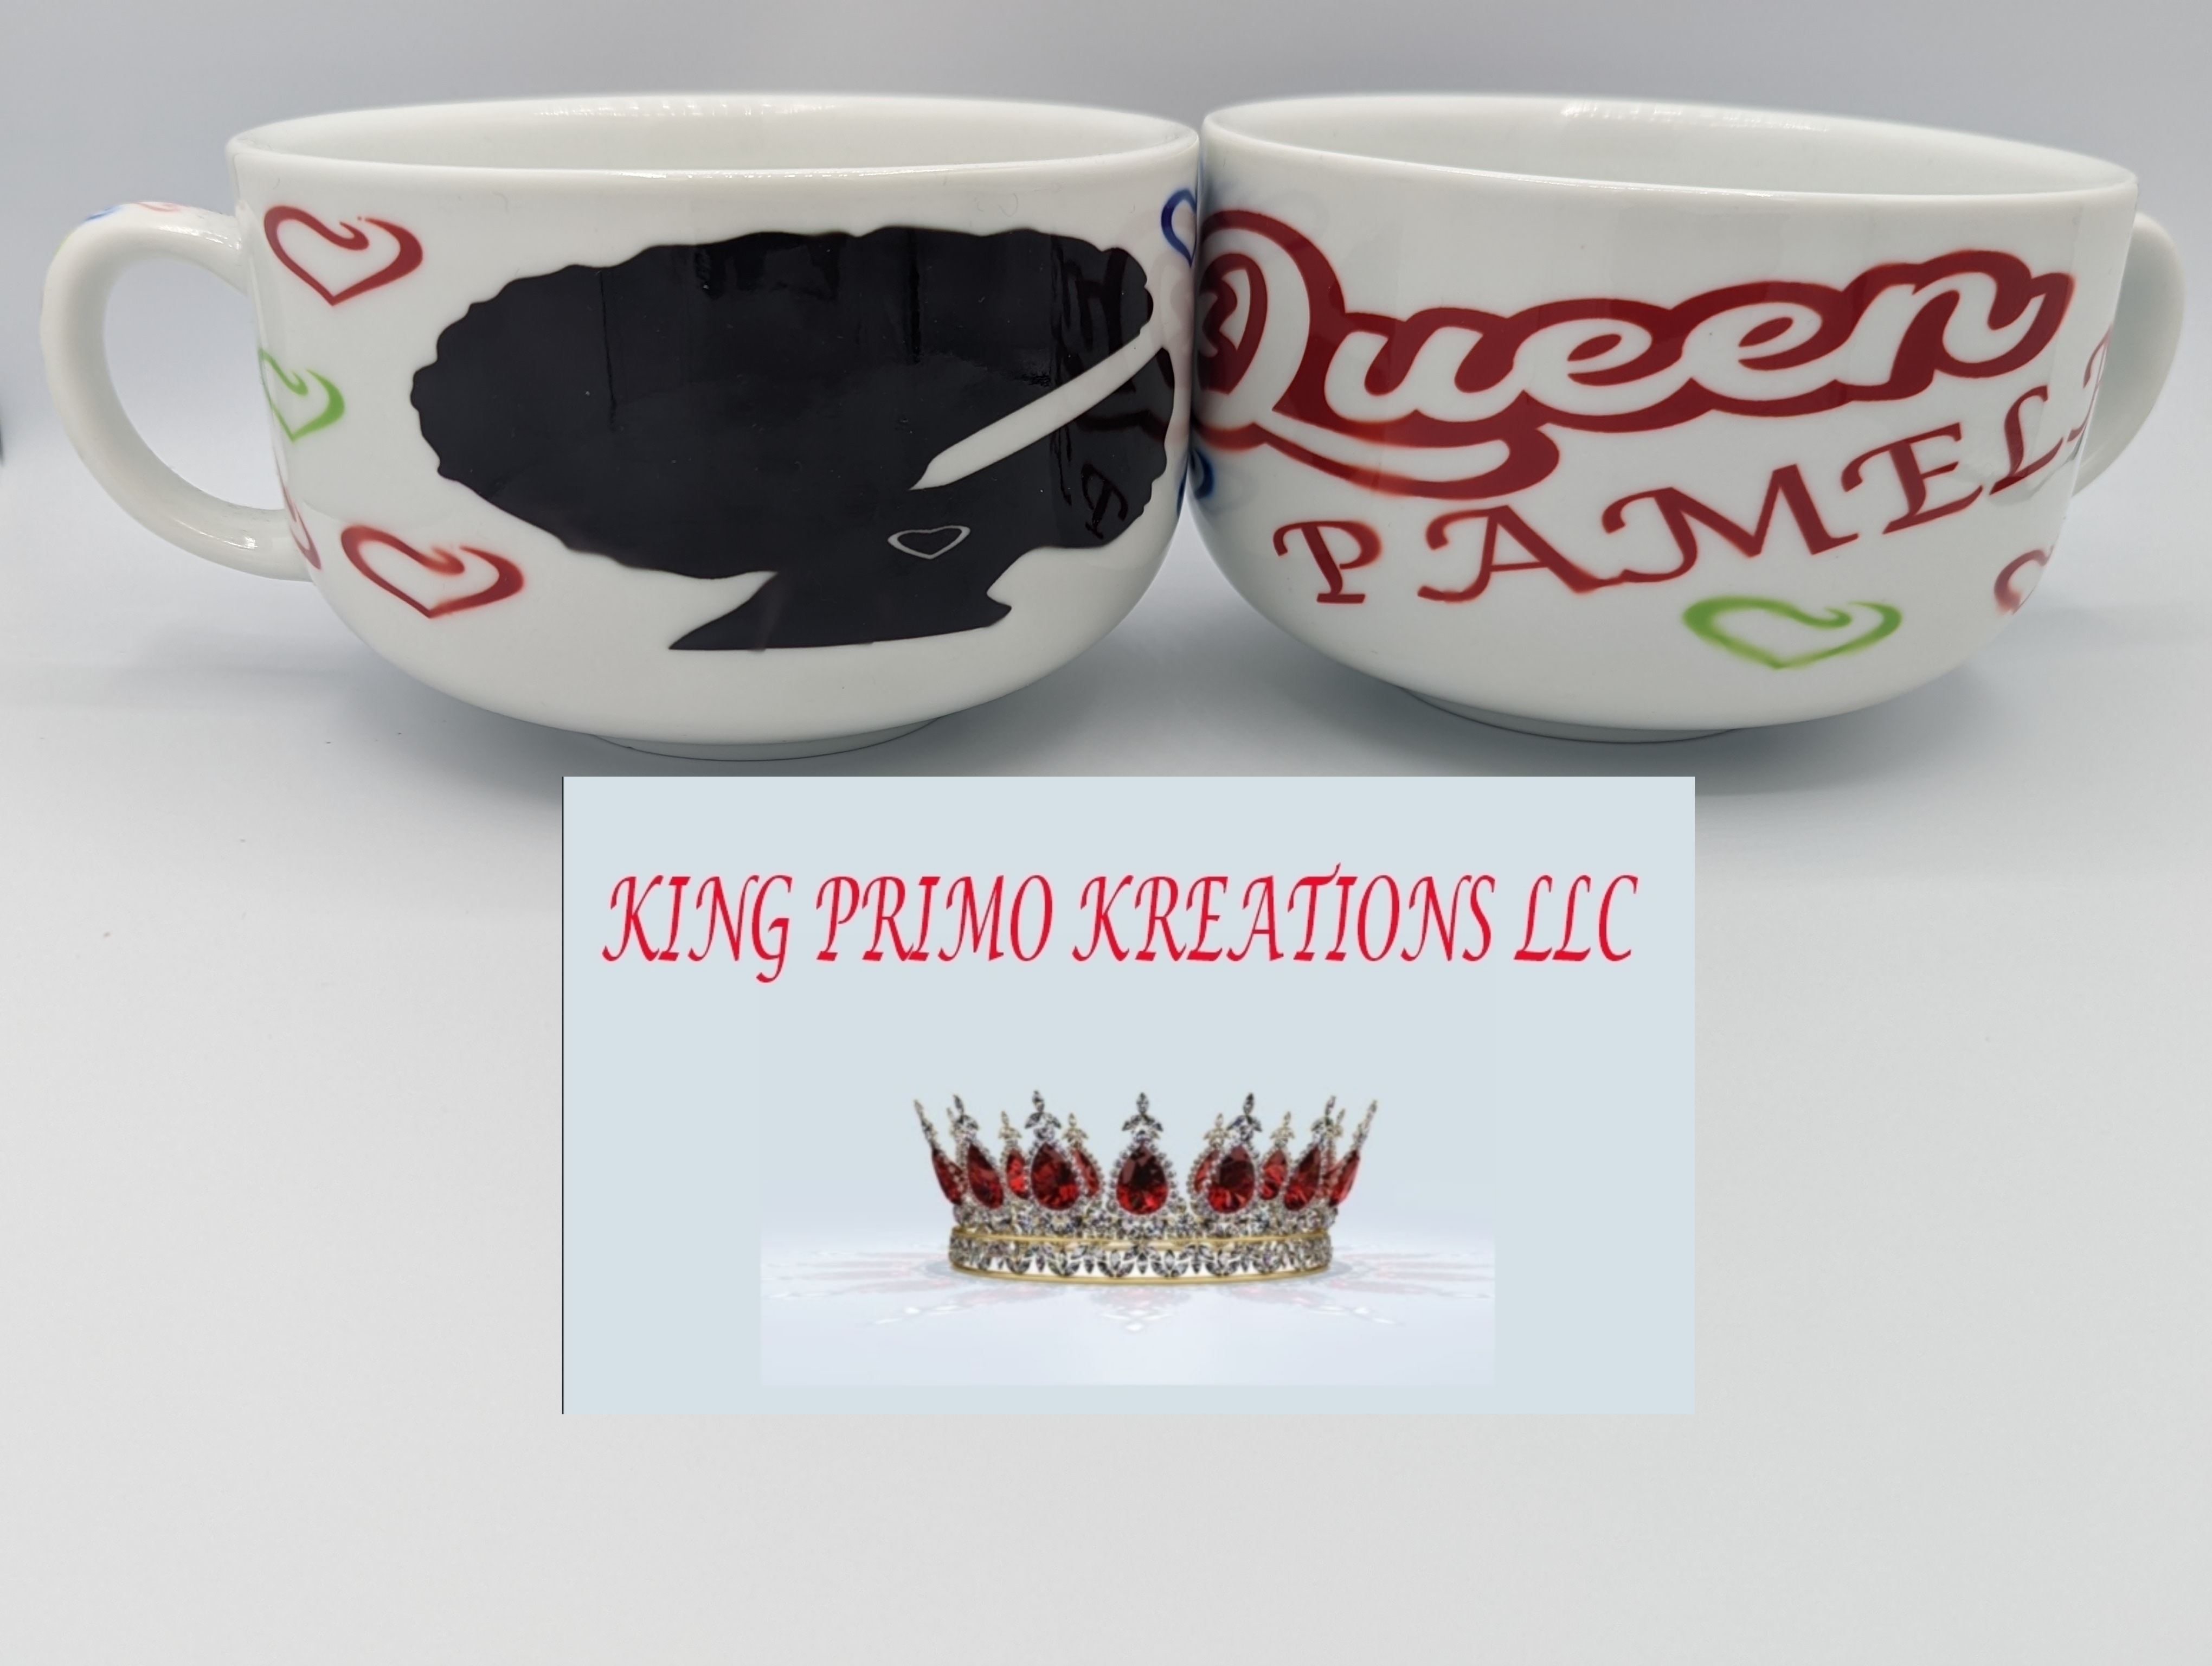 EVERYTHING BOWL made with sublimation printing